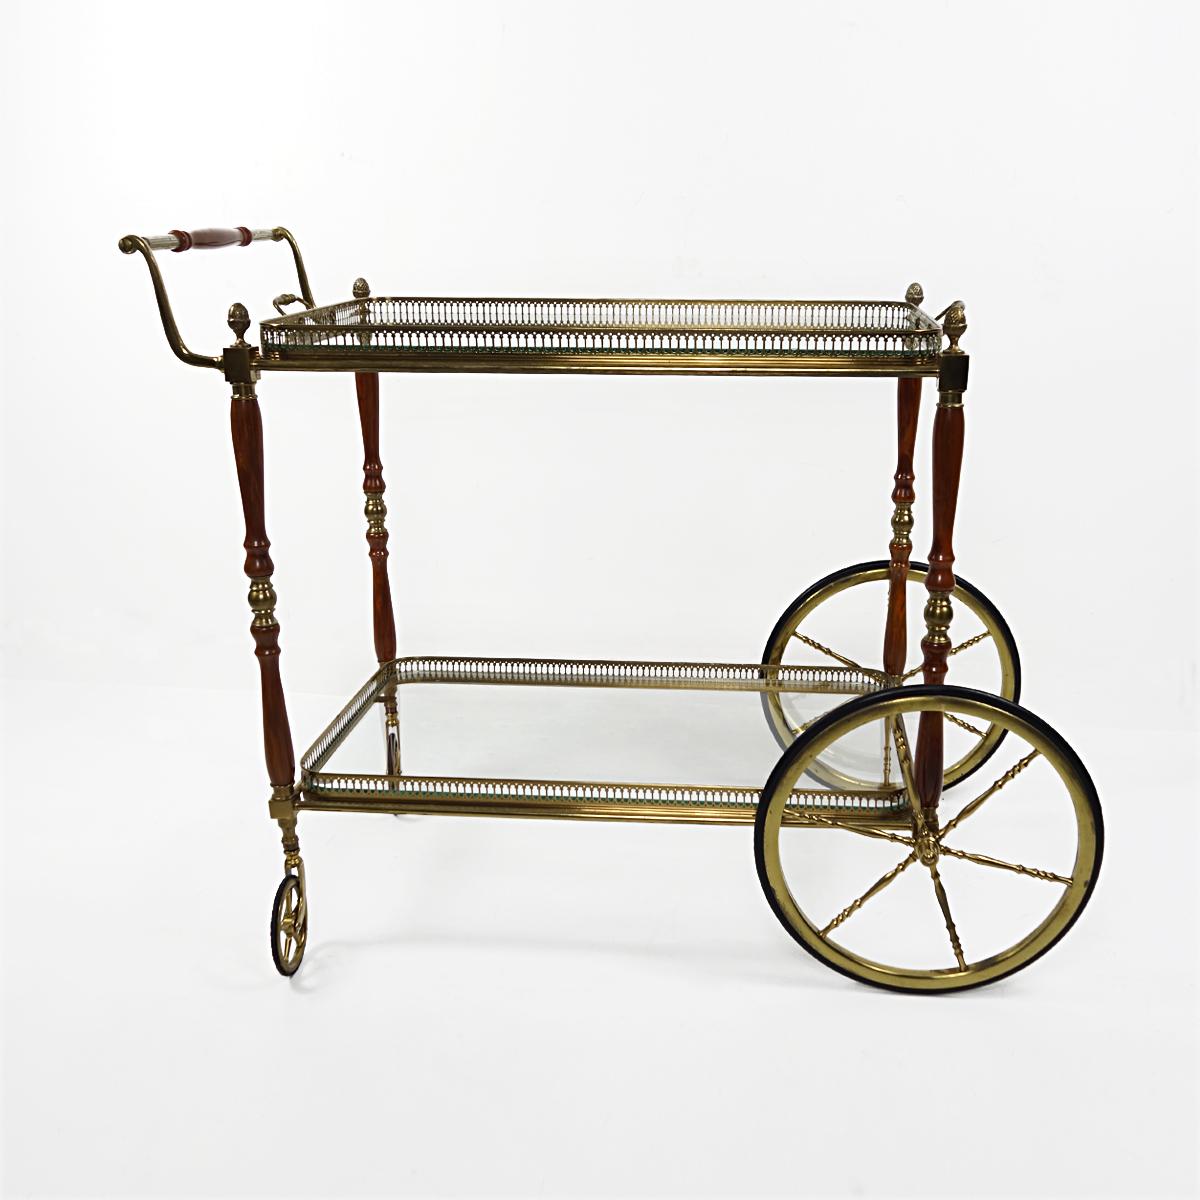 Mid-20th Century Hollywood Regency Bar Cart Made of Brass and Mahogany by Maison Jansen For Sale